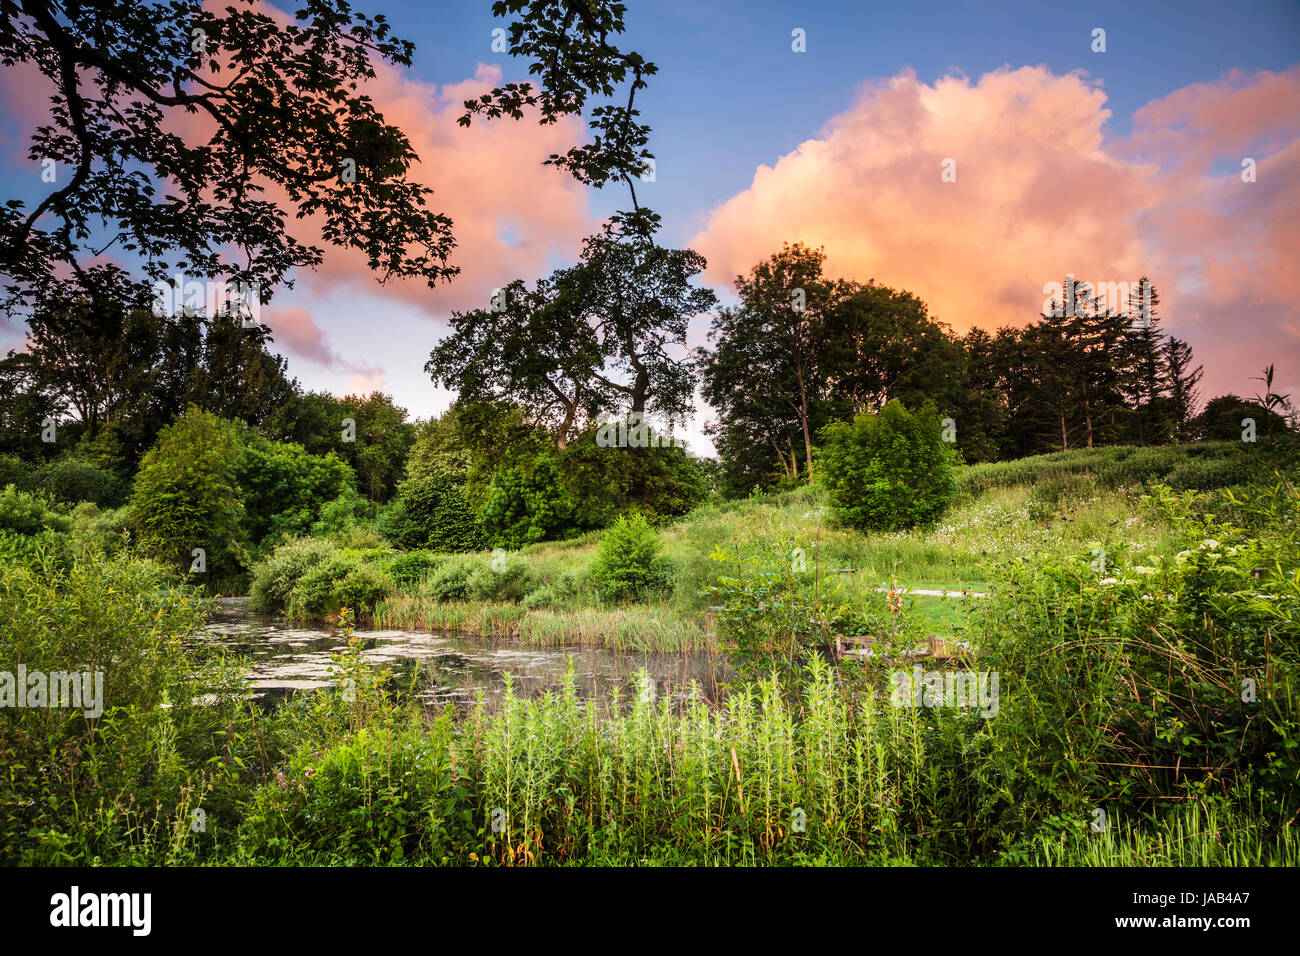 A colourful sunrise sky over the Old Pond at Lydiard Park in Swindon, Wiltshire. Stock Photo